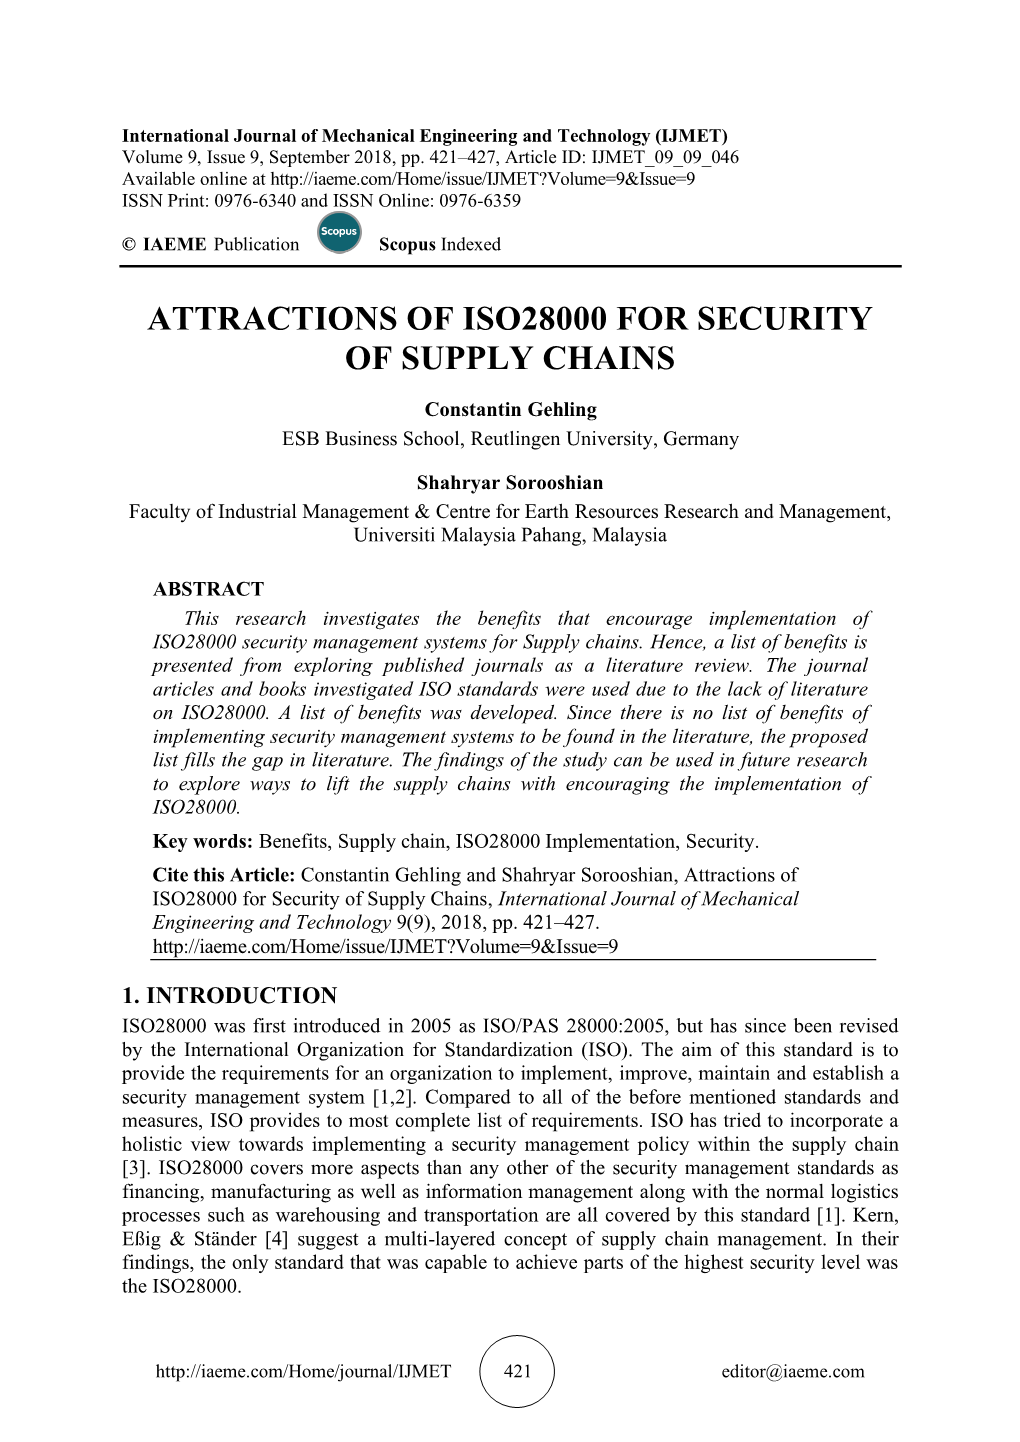 Attractions of Iso28000 for Security of Supply Chains